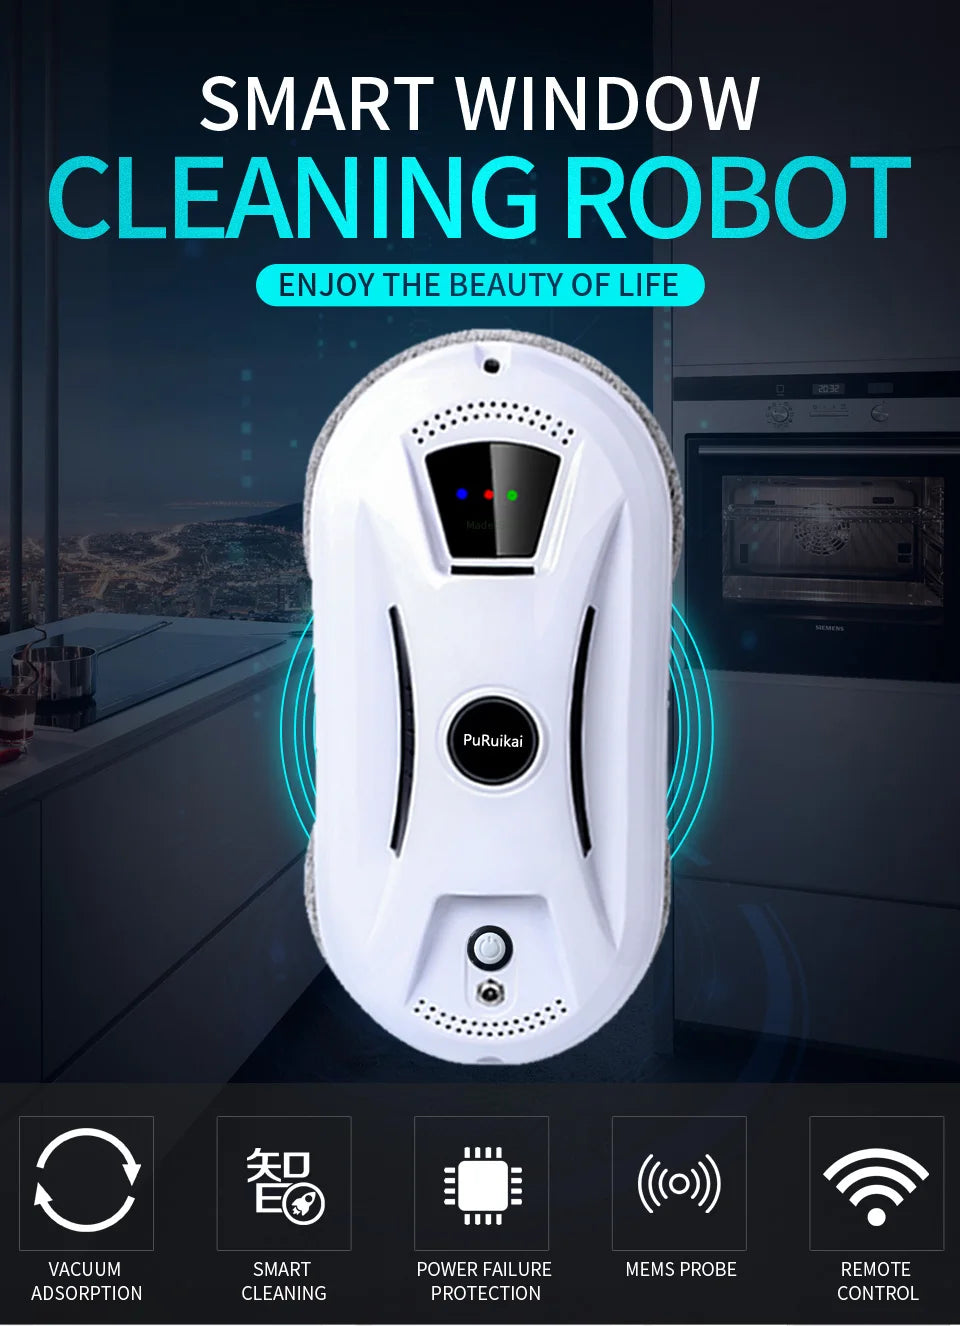 window cleaning robot for home - CrazyGiz Shop